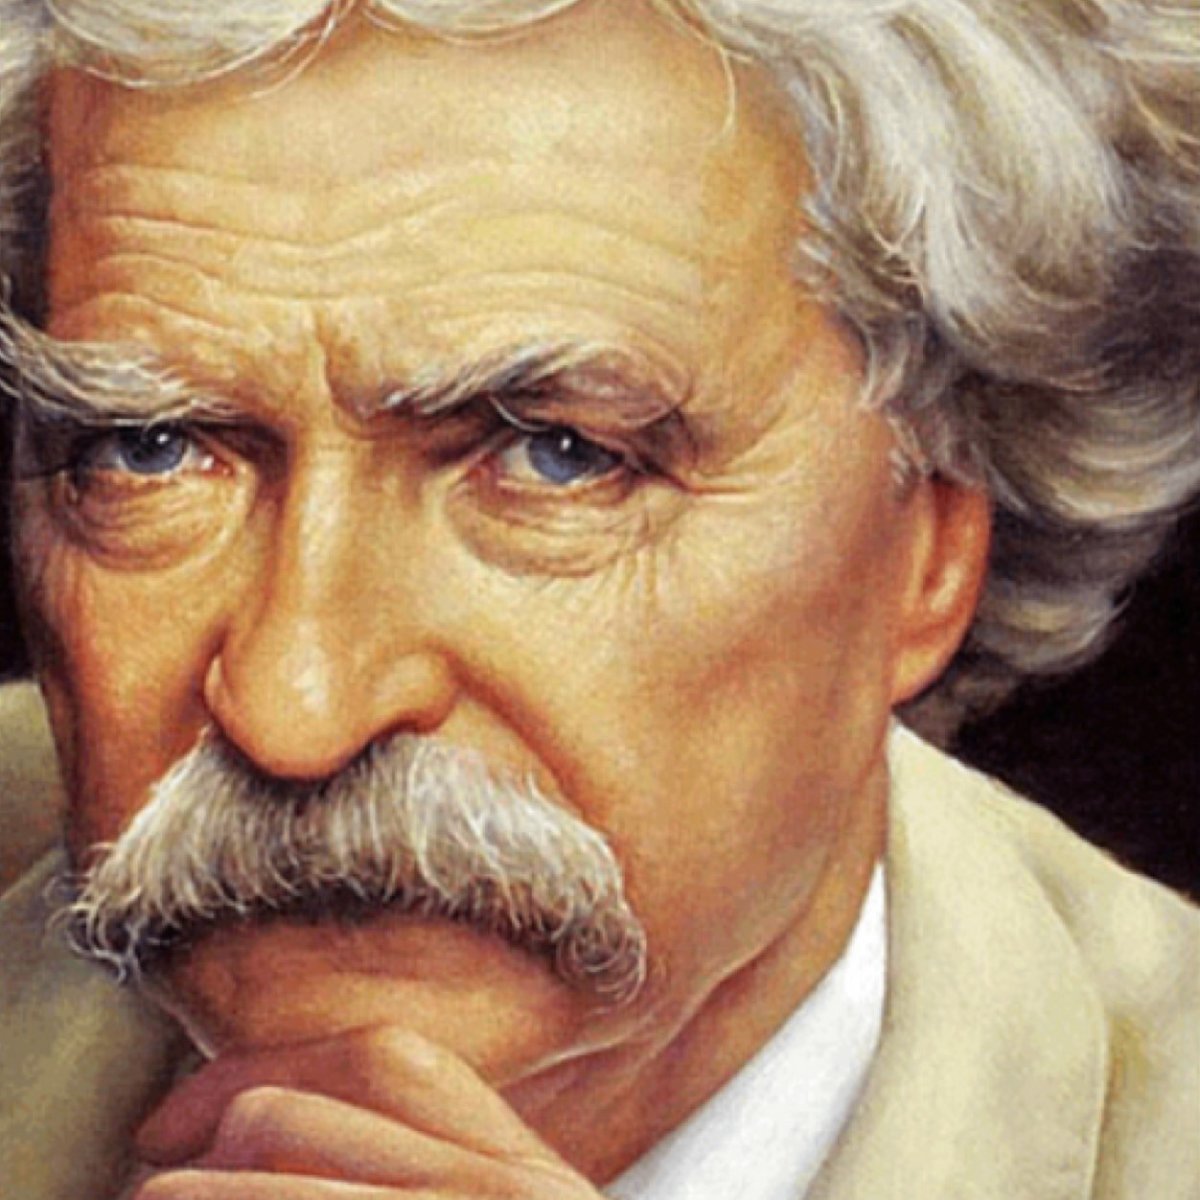 Mark Twain and his Fate.